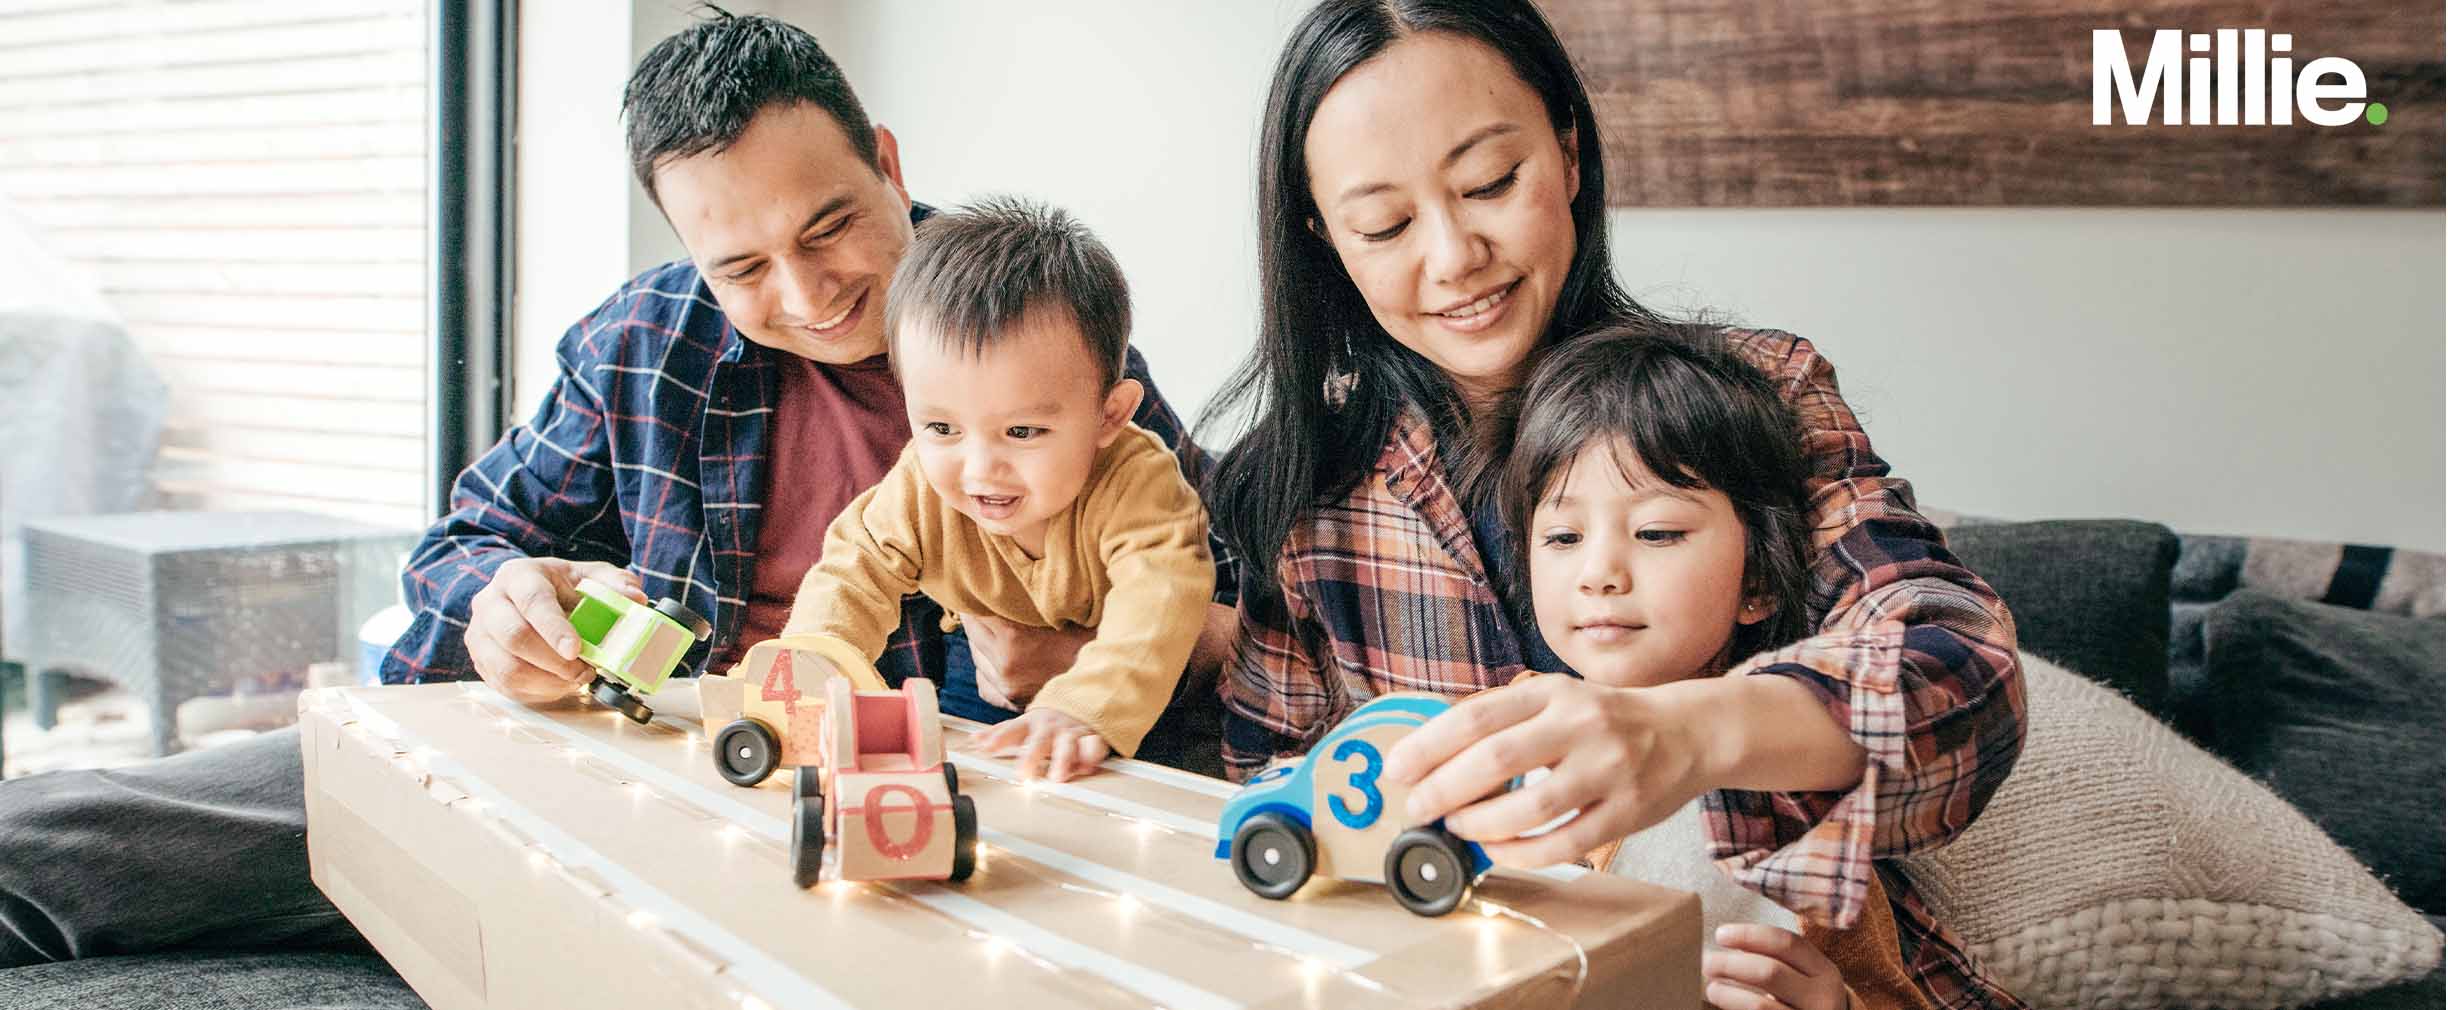 A mom and dad with their two young children playing with toy cars in their living room.